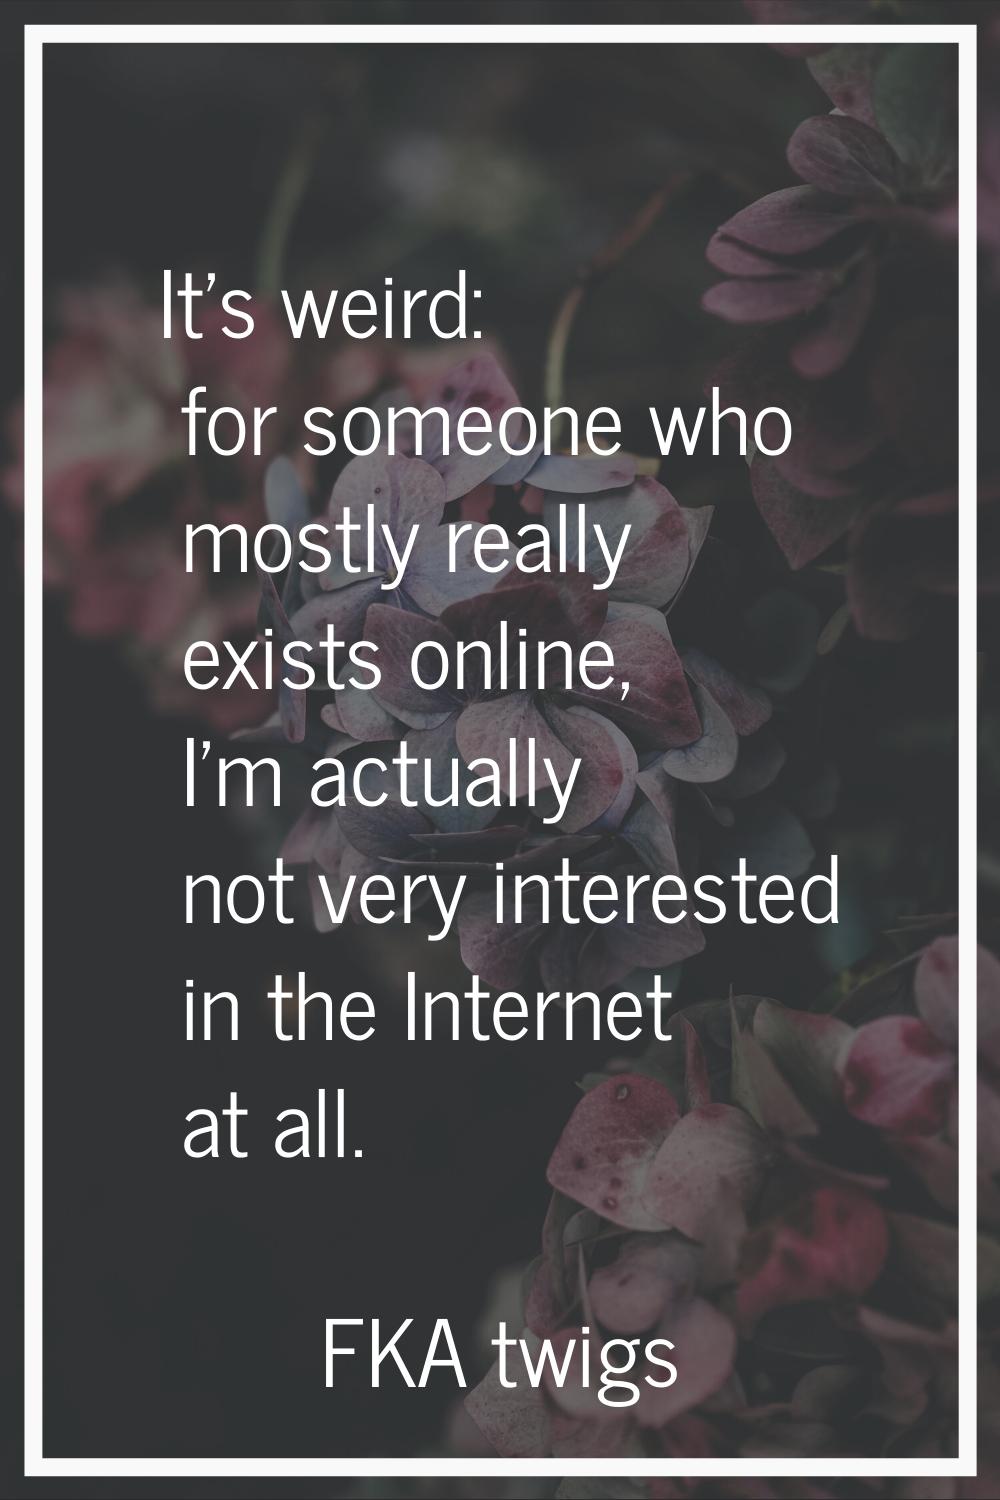 It's weird: for someone who mostly really exists online, I'm actually not very interested in the In